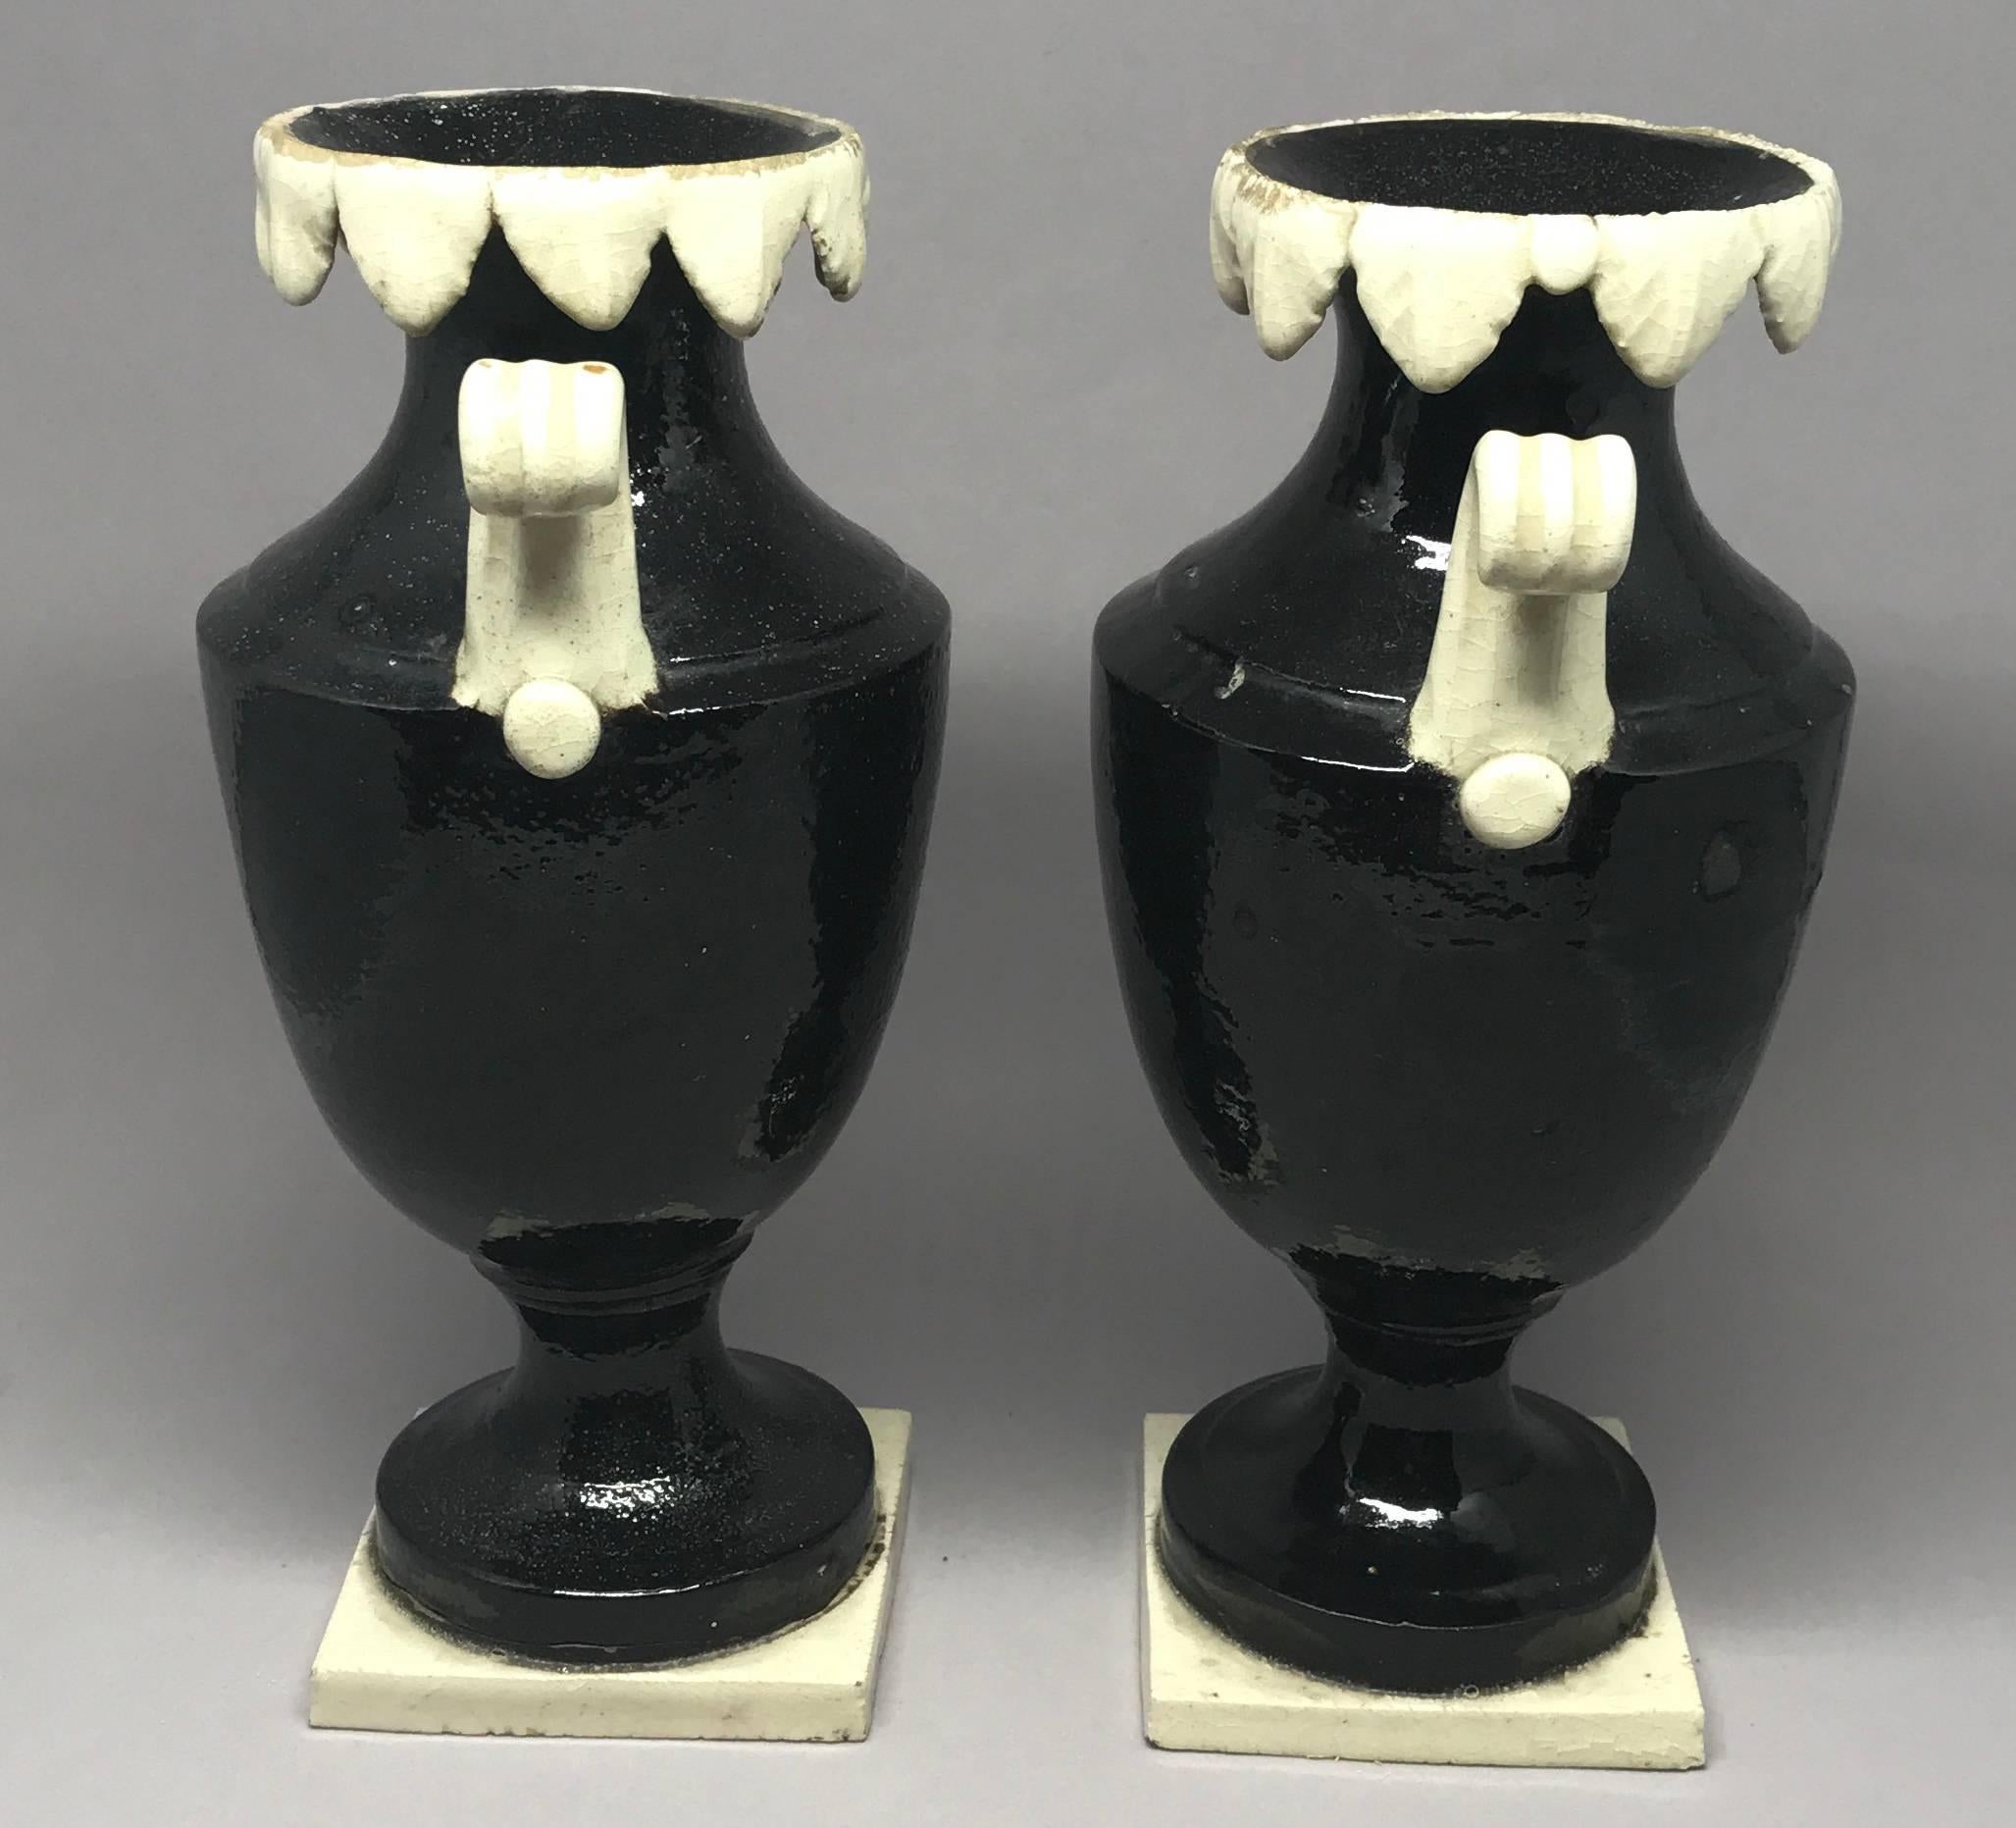 Italian Pair of Neoclassical Black and White Giustiniani Urns For Sale